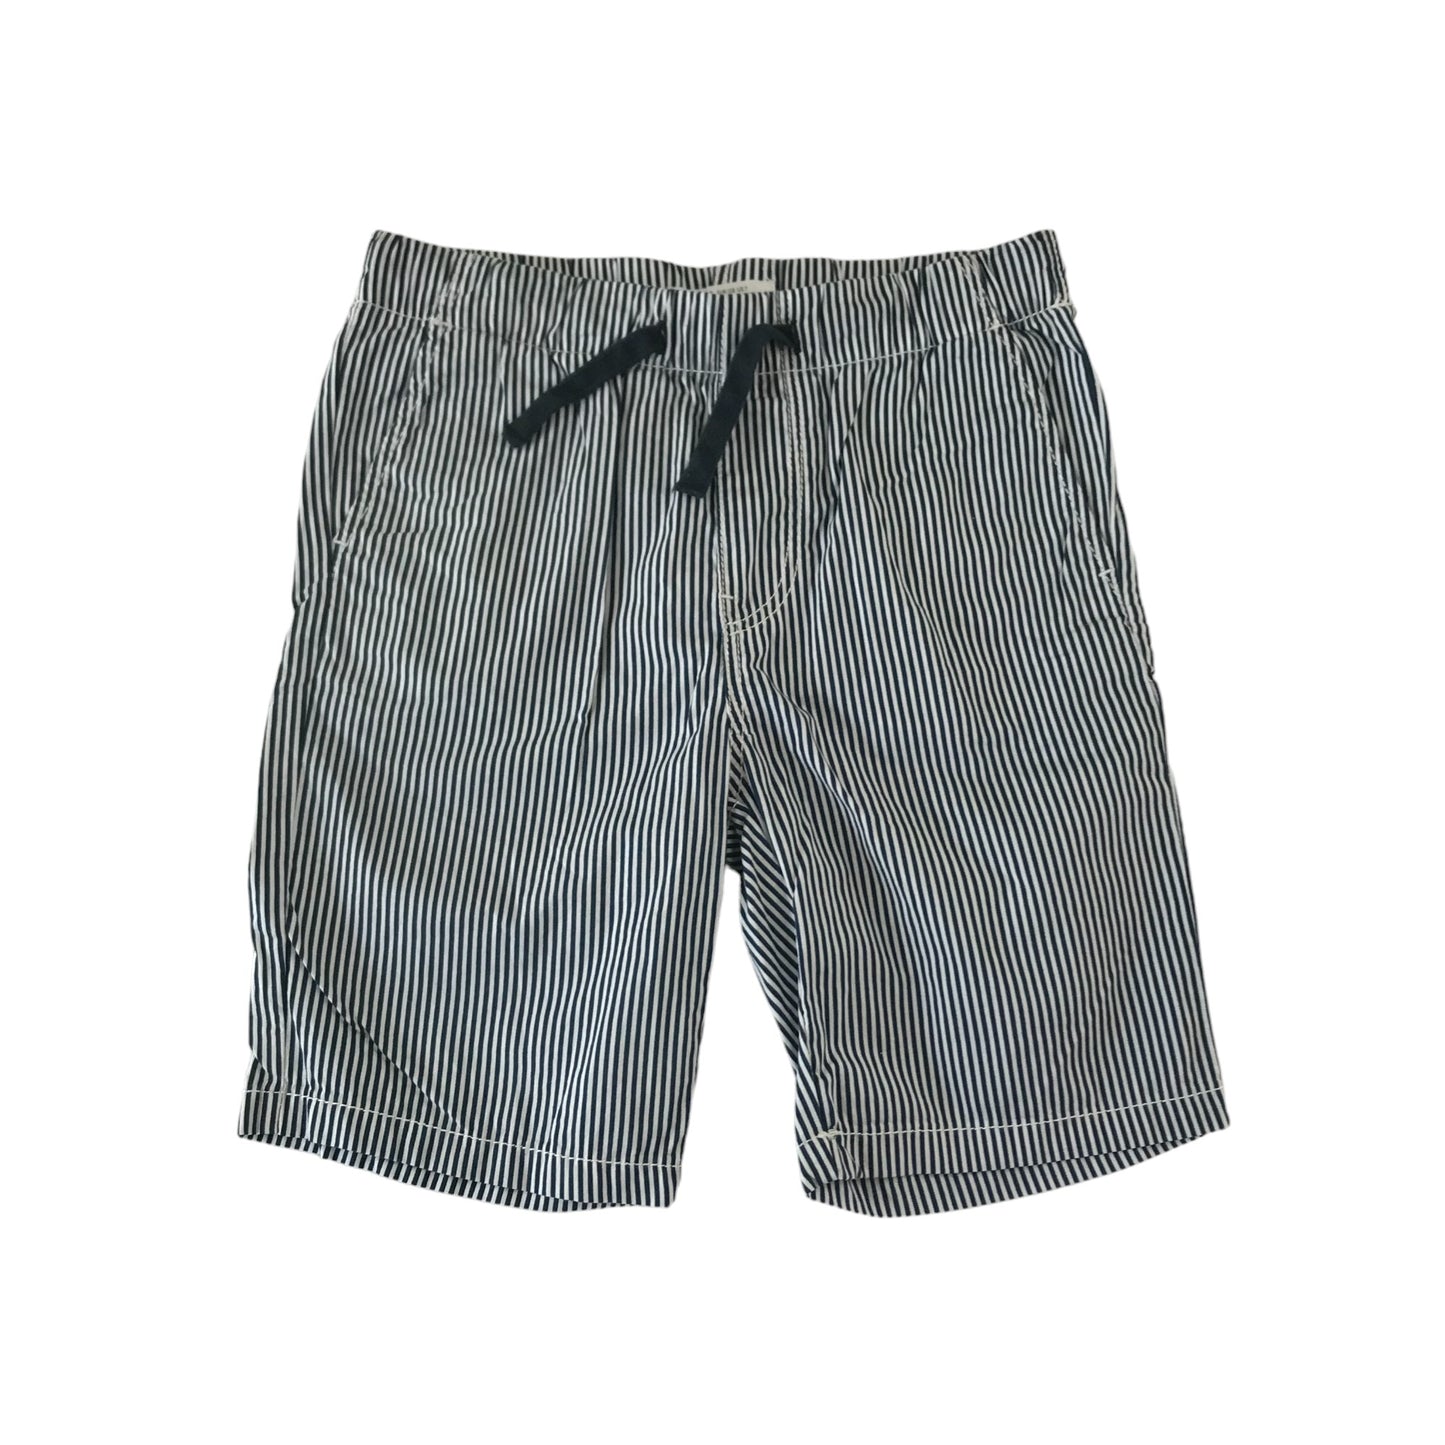 H&M Shorts Bundle Age 7 Navy Stripy and Charcoal Pull Up Cotton